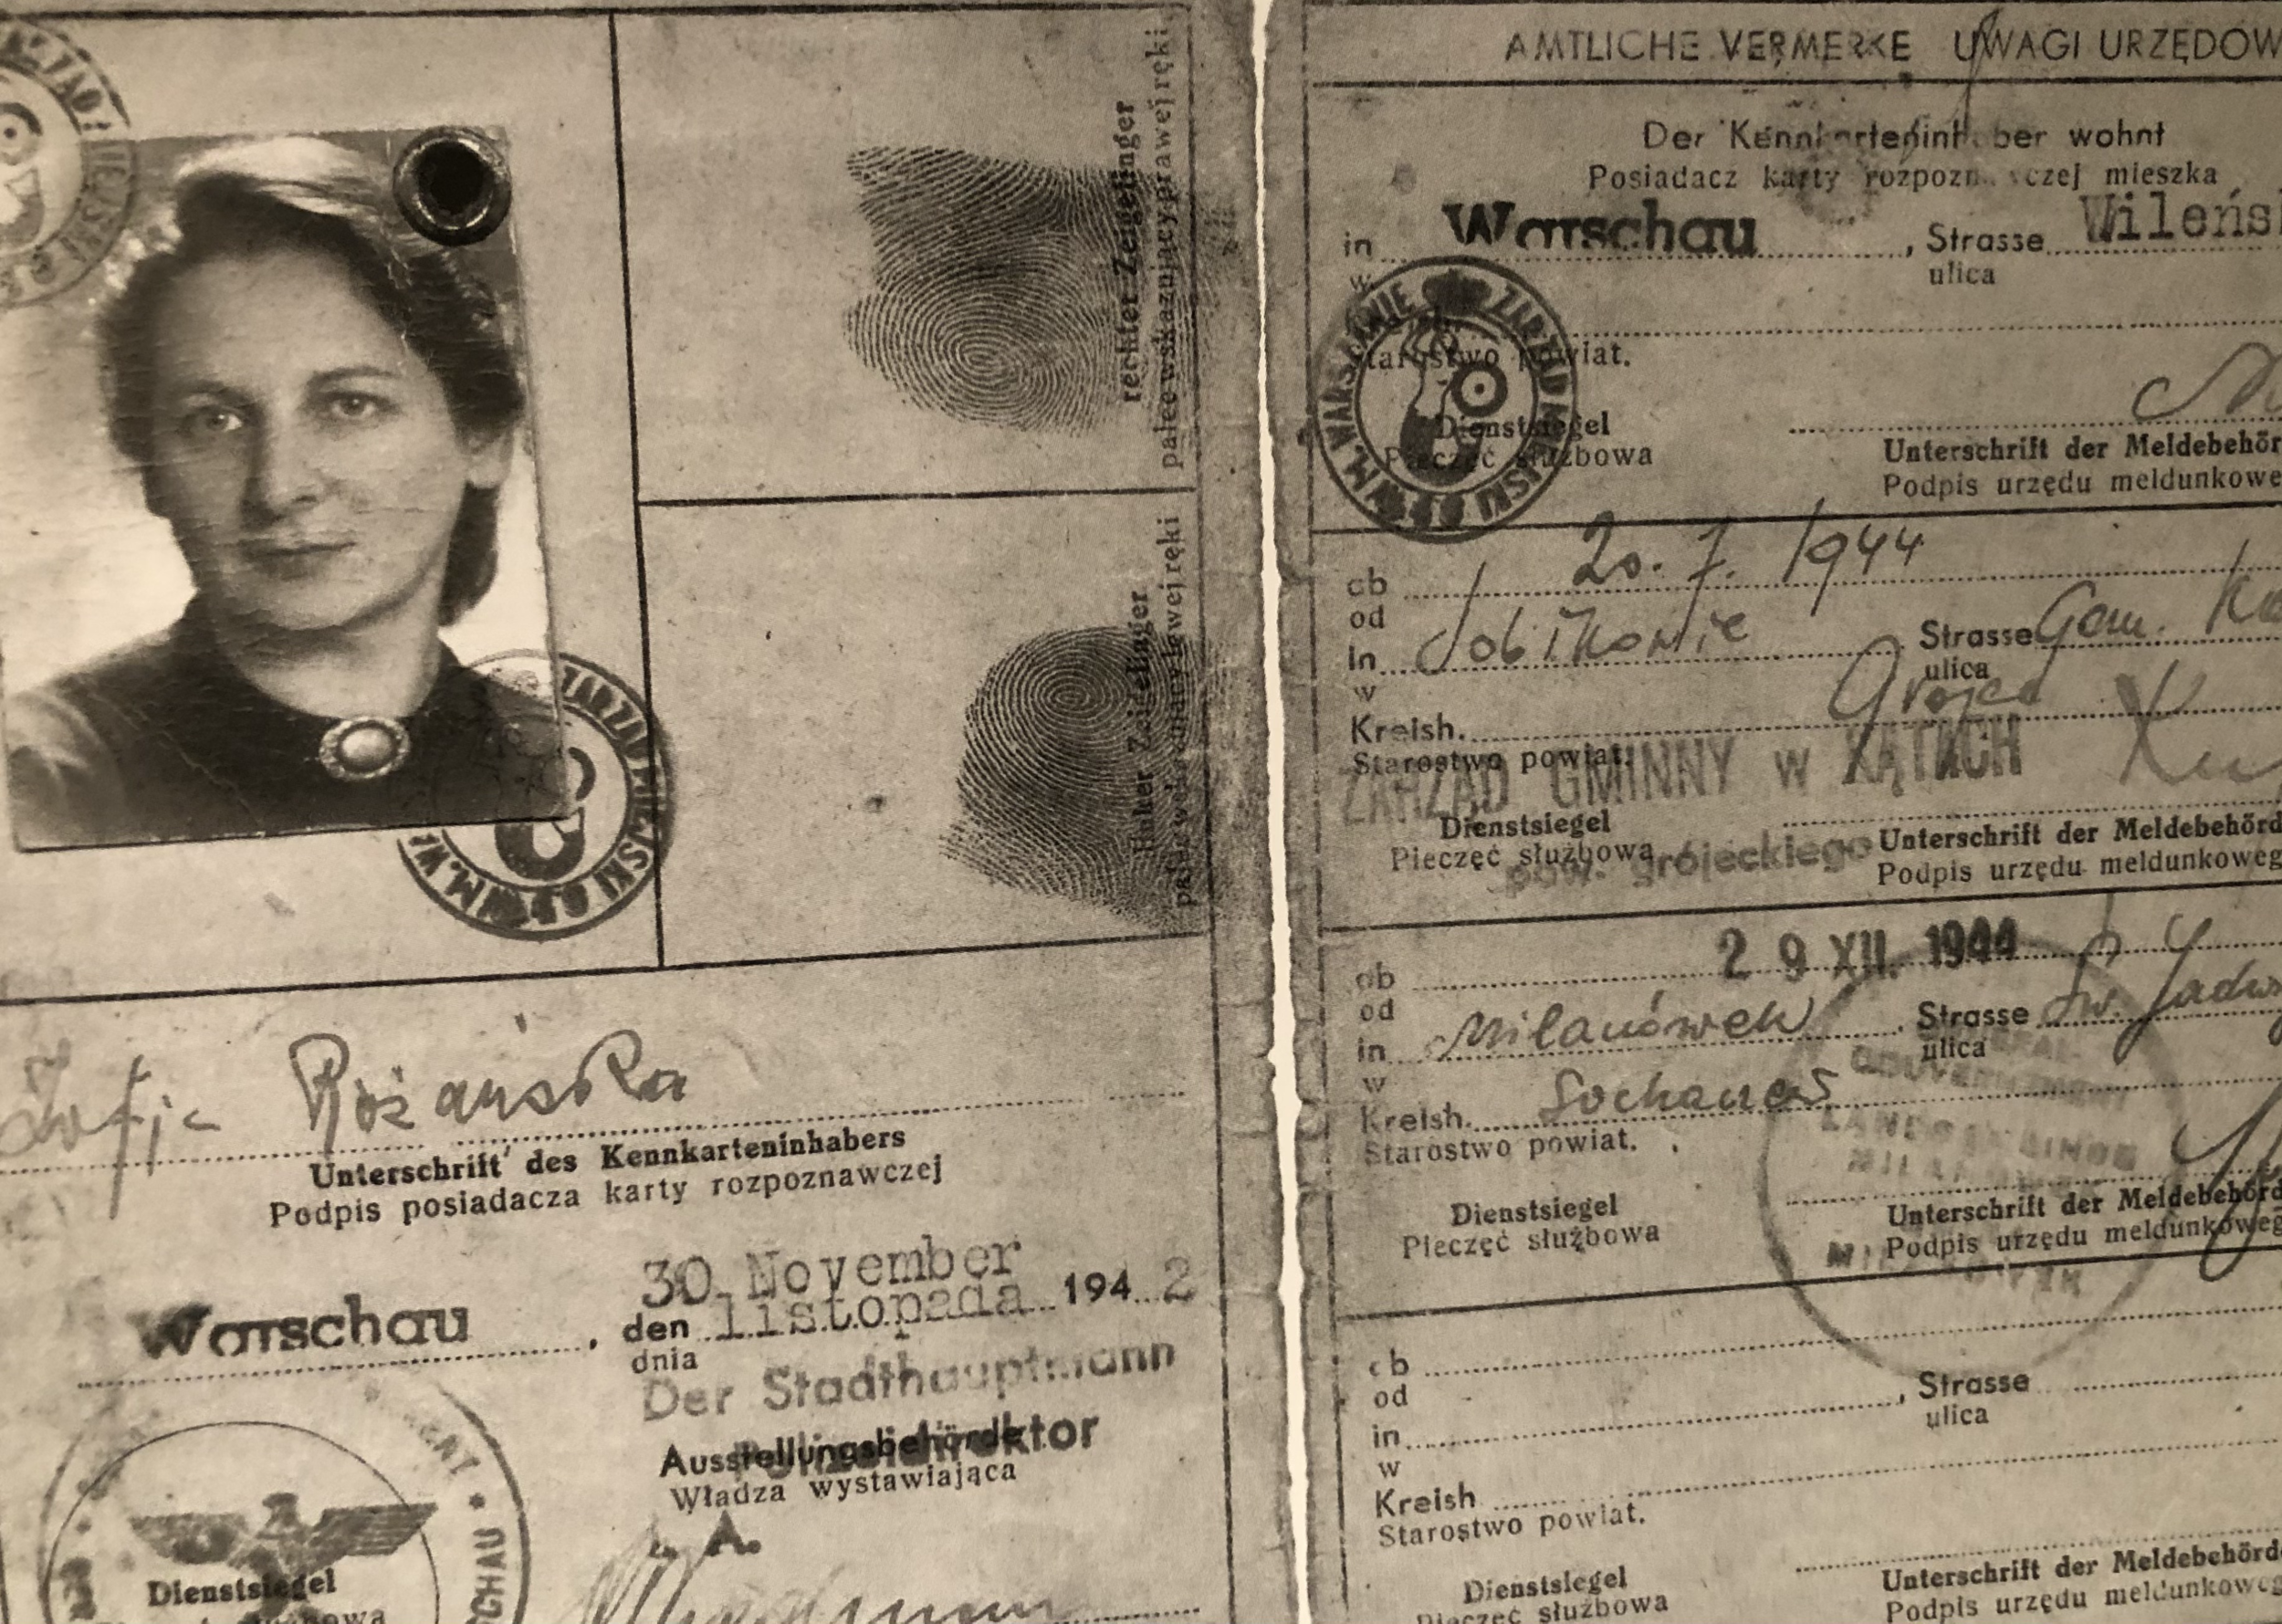 My mother's fake identity card during WWII